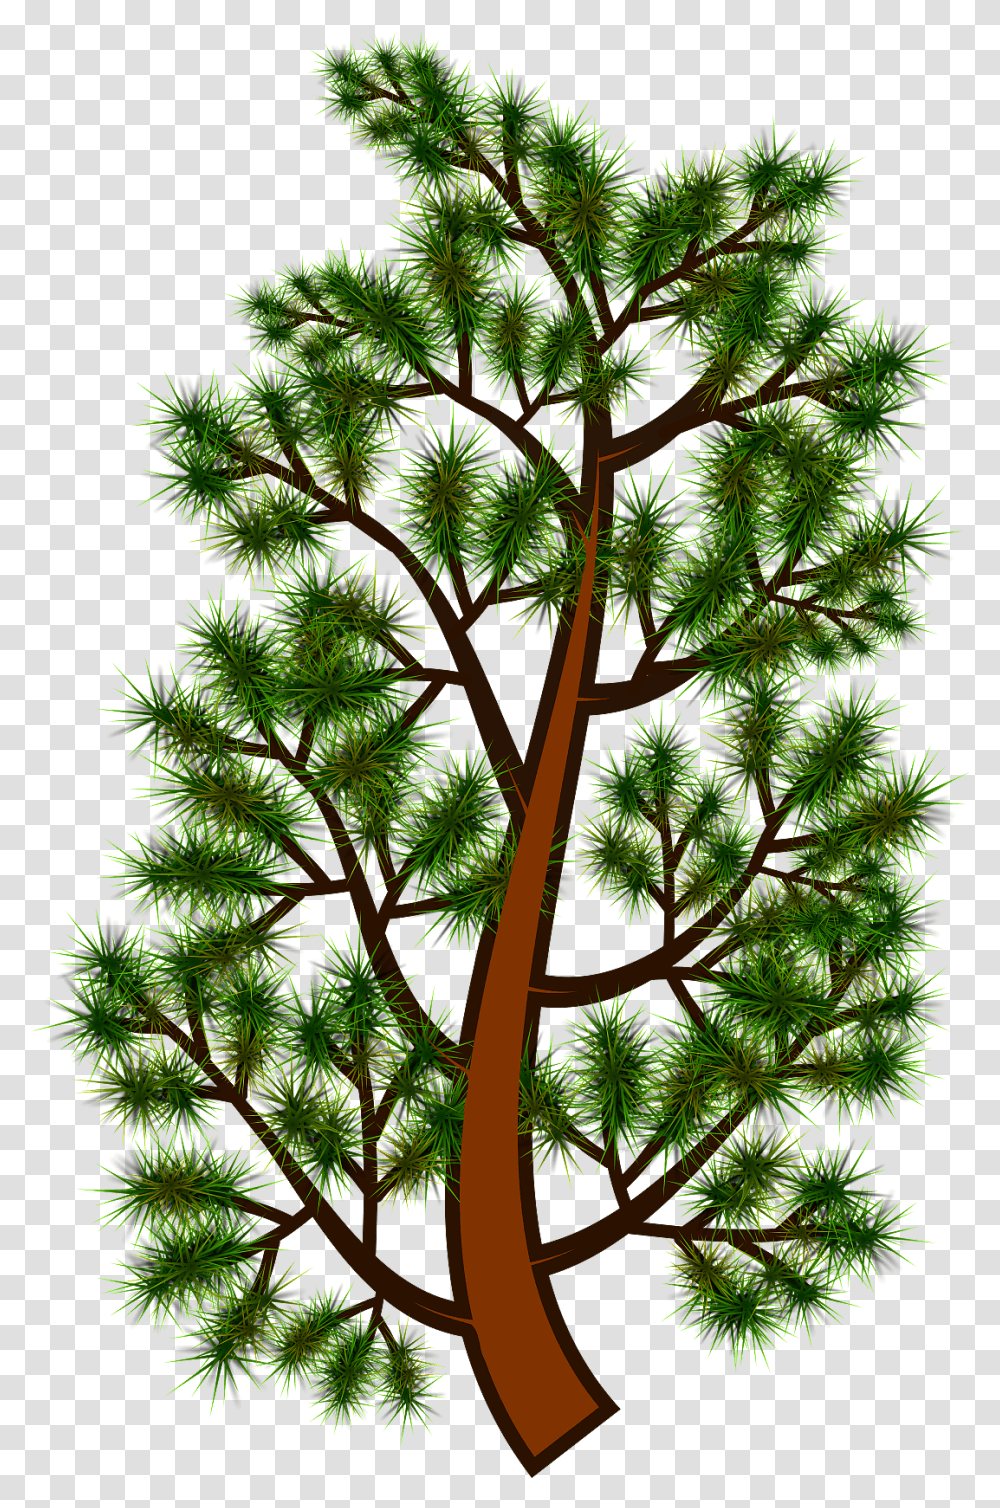 Pine Tree Branch 06052016 1 Clipart Tallo Del Pino, Plant, Potted Plant, Vase, Jar Transparent Png